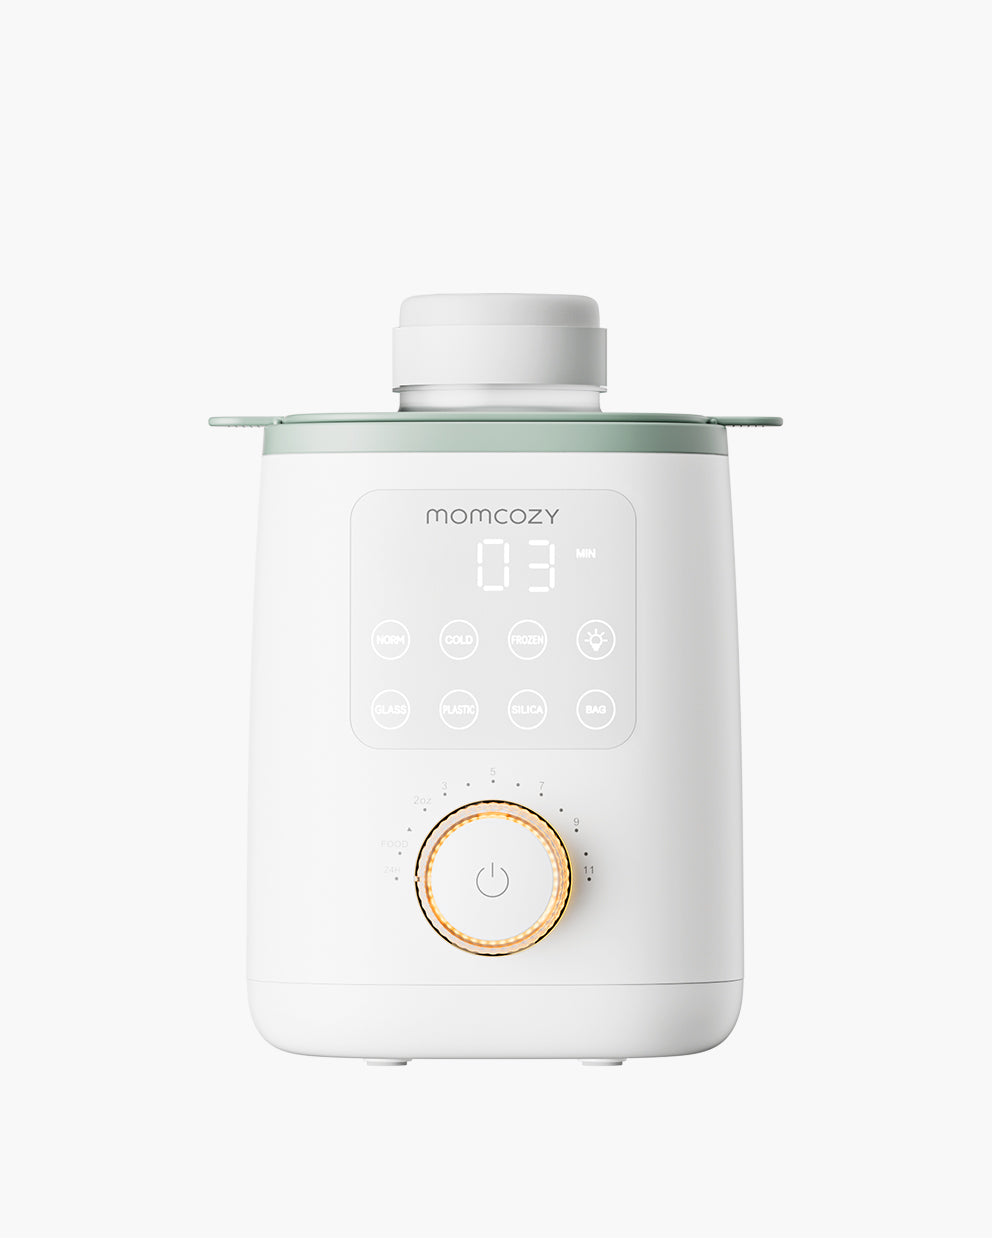  Momcozy Retain Nutrients Bottle Warmer, 9-in-1 Baby Bottle  Warmer with Night Light, Accurate Temperature to Preserve Fullest Nutrients  in Breast Milk, Bottle Warmers for All Bottles : Baby